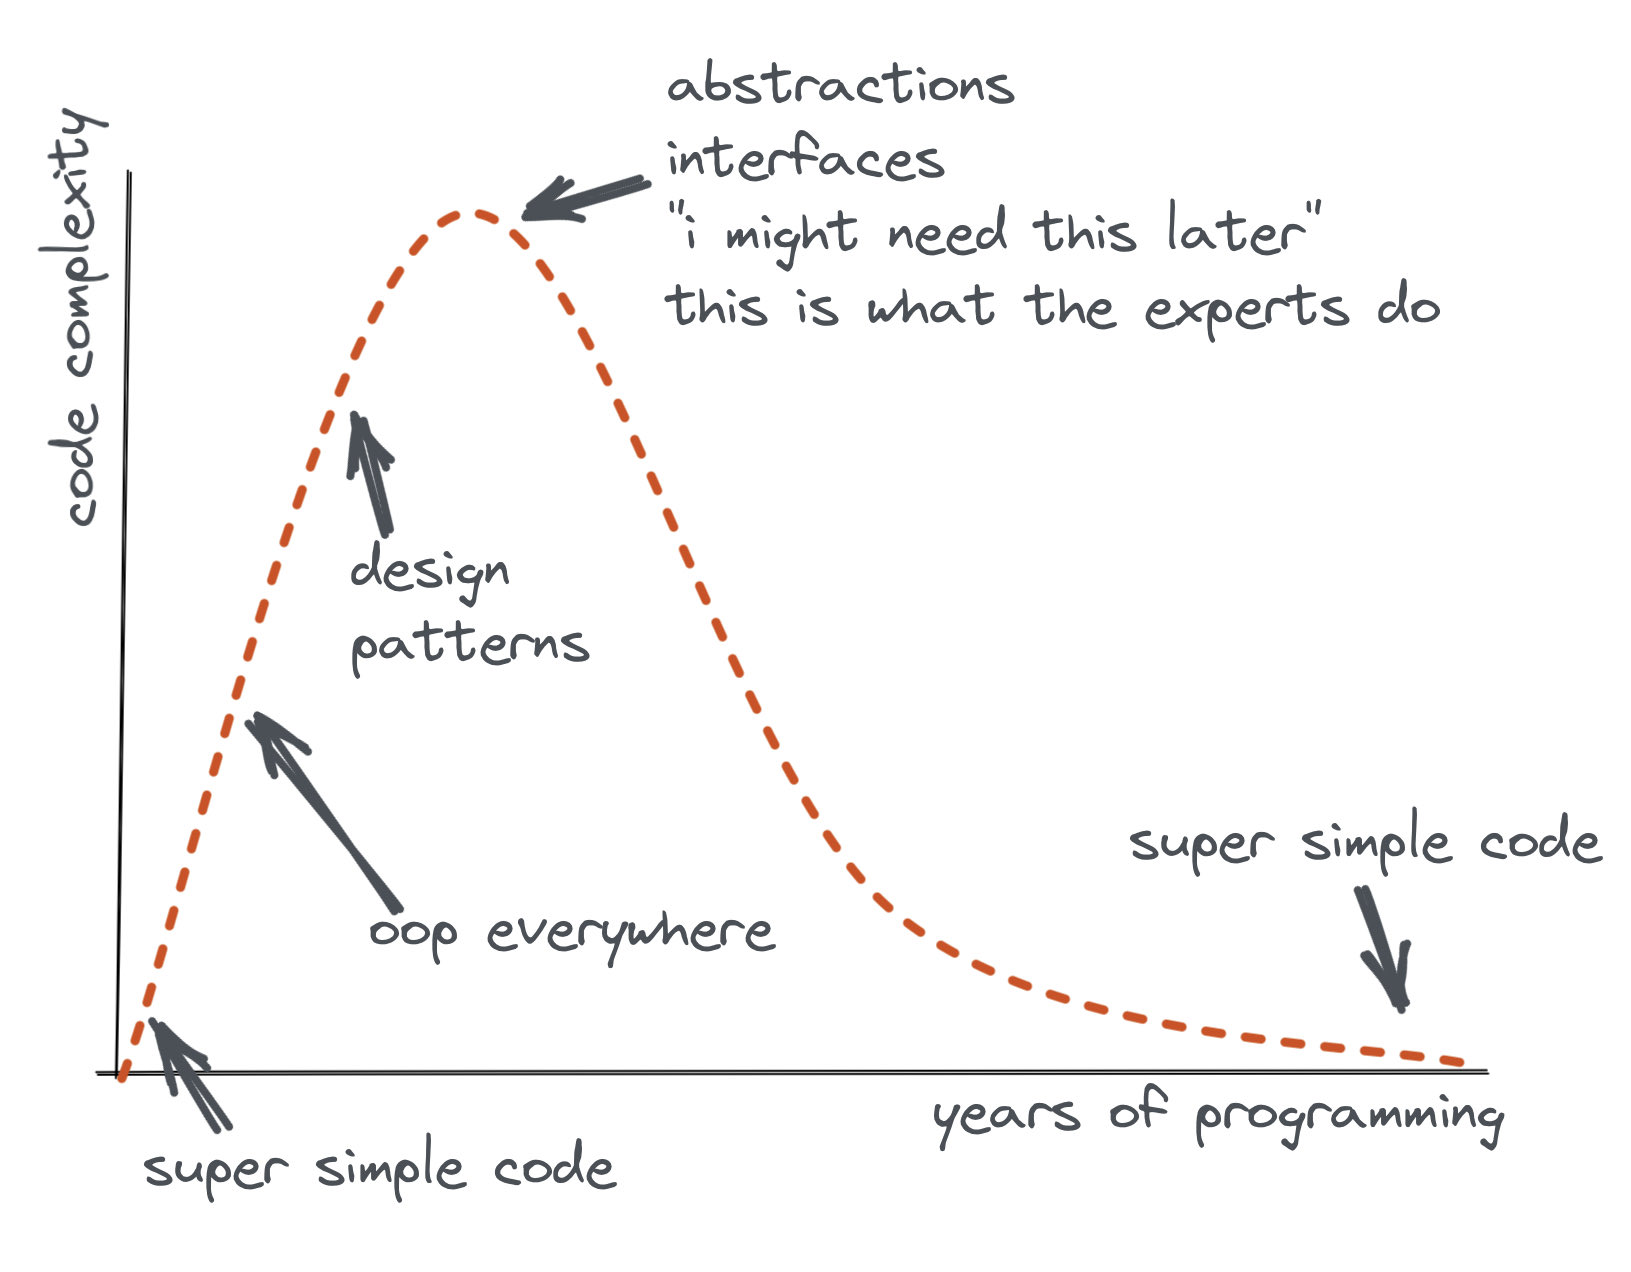 
          An image is shown. The image is a line chart that shows that as your years of programming progress, your Code complexity goes up until it reaches a plateau, and goes back down to “super simple code” as you become a programming expert. The peak has an arrow pointing to it that suggests that when you’re at your worst complexity, you’re building abstractions and interfaces.